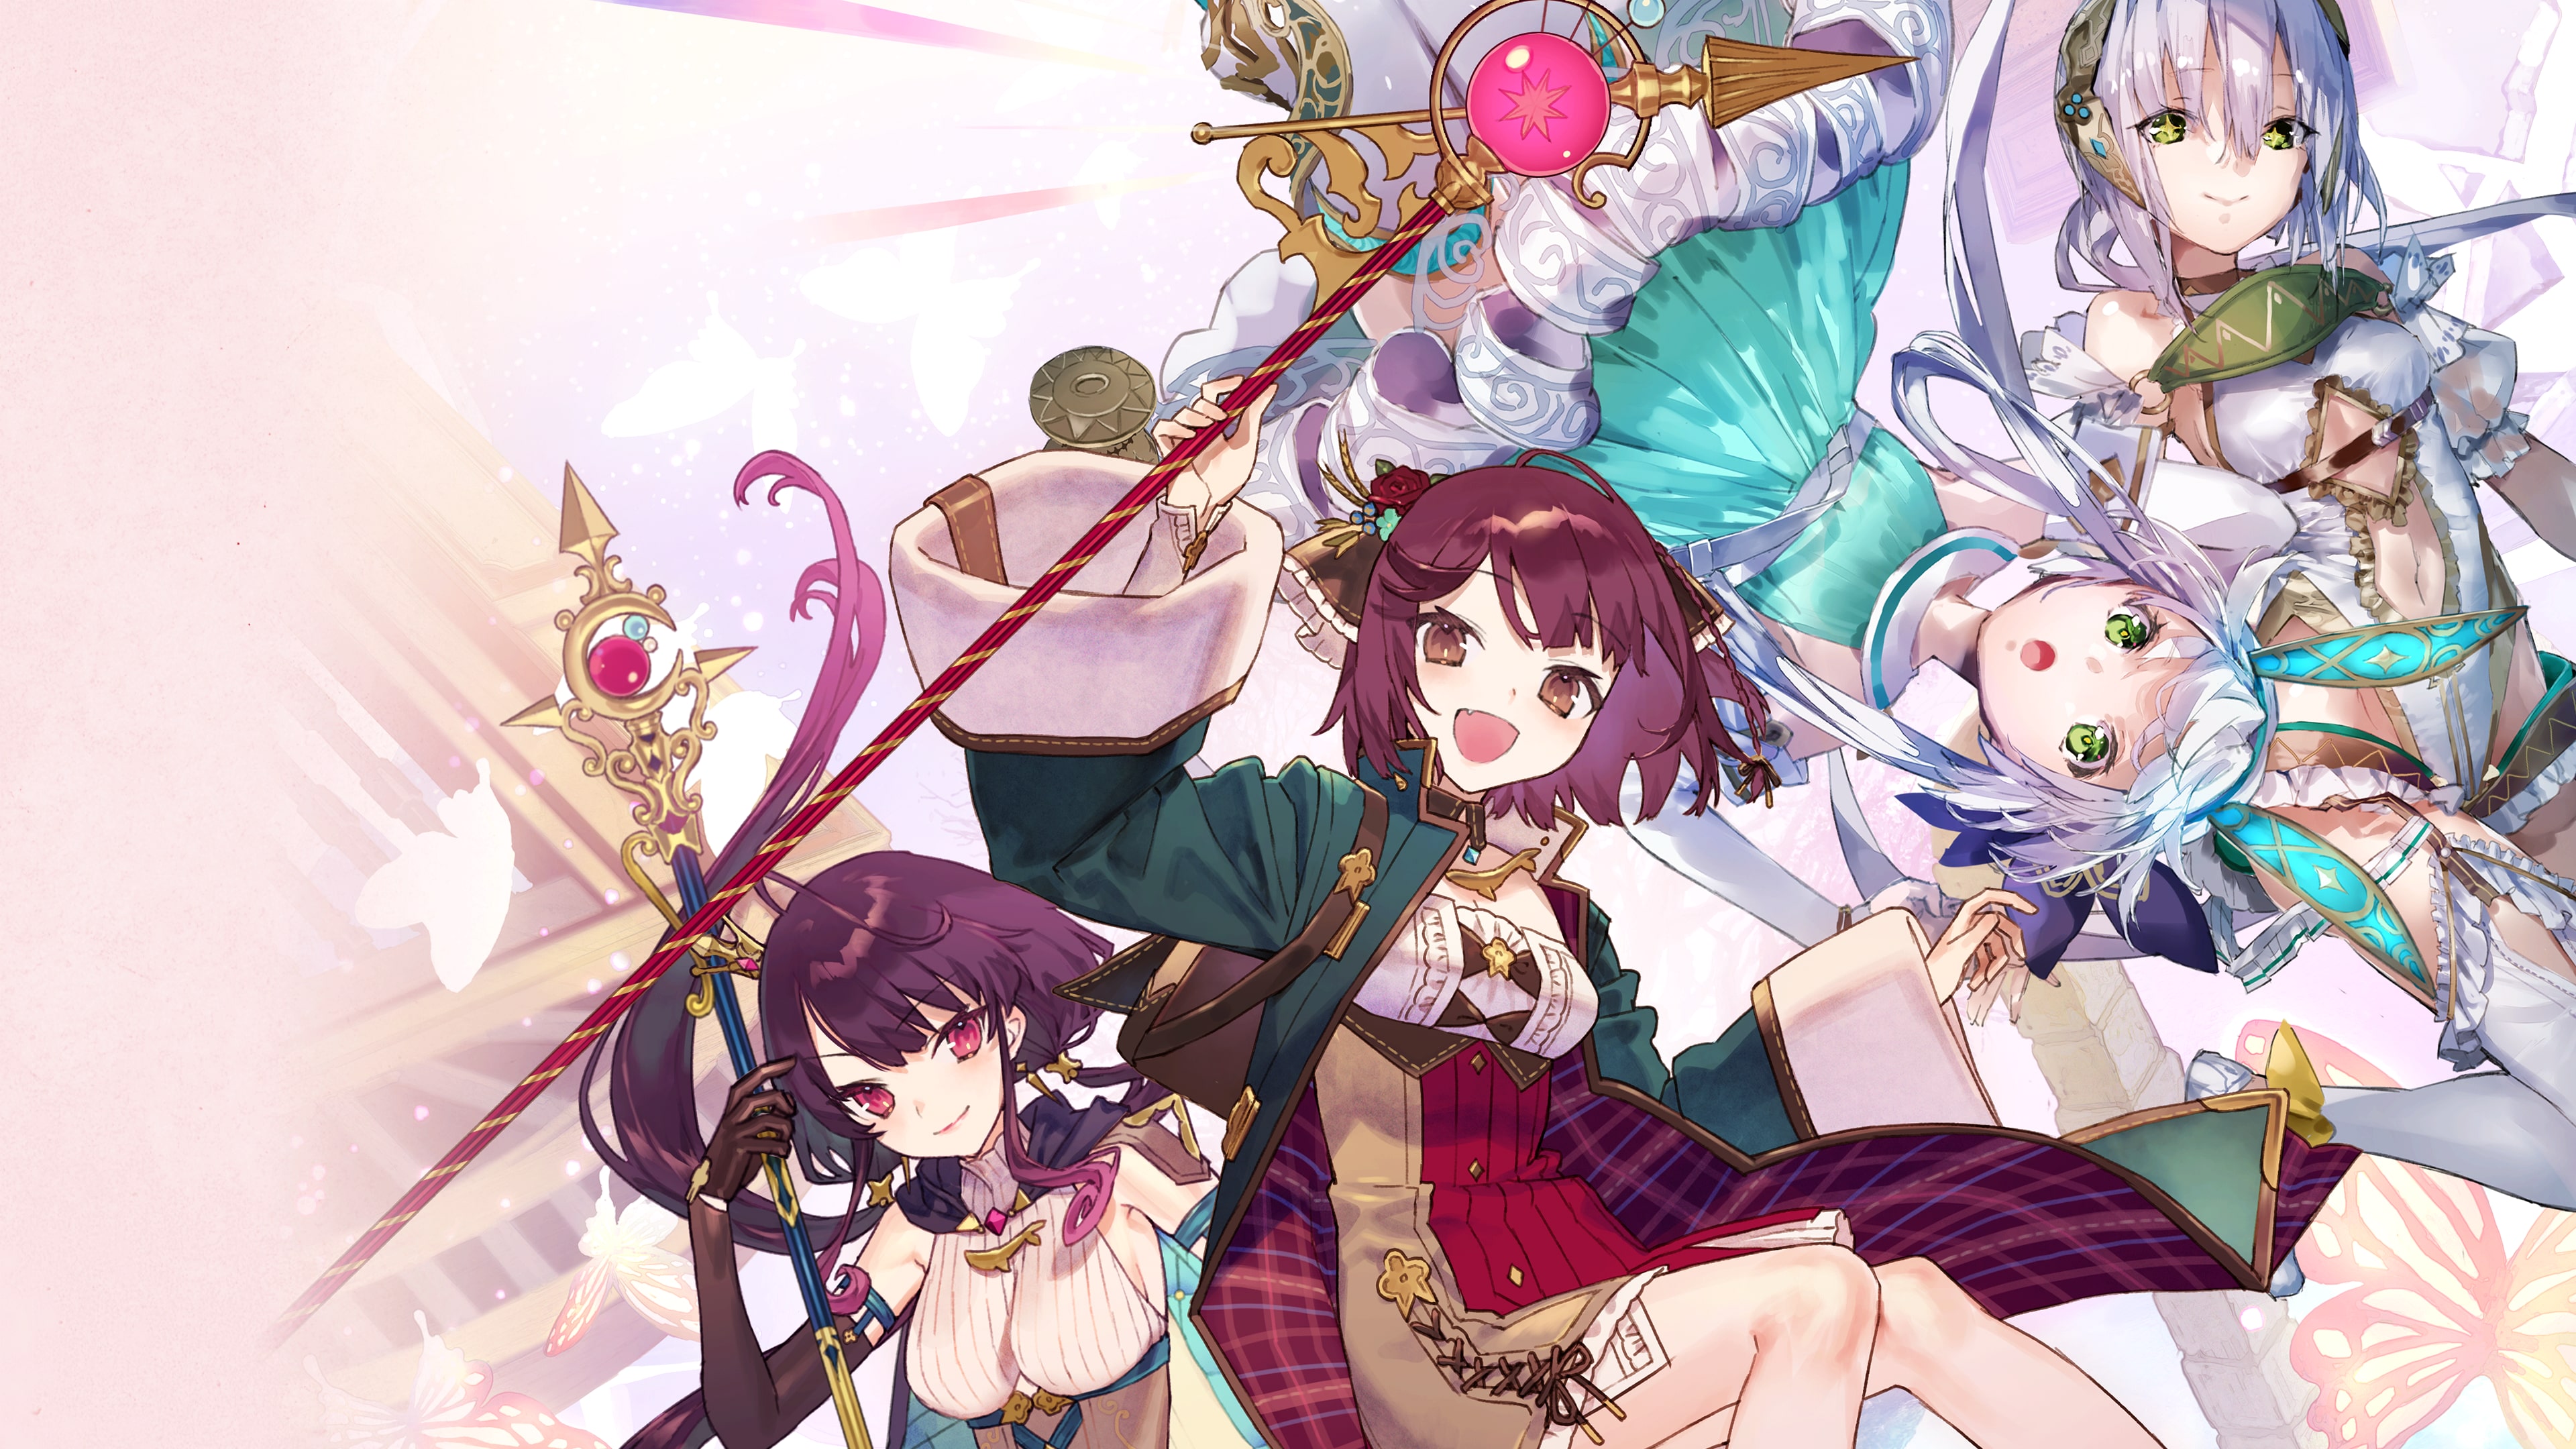 Atelier Sophie 2: The Alchemist of the Mysterious Dream (English)